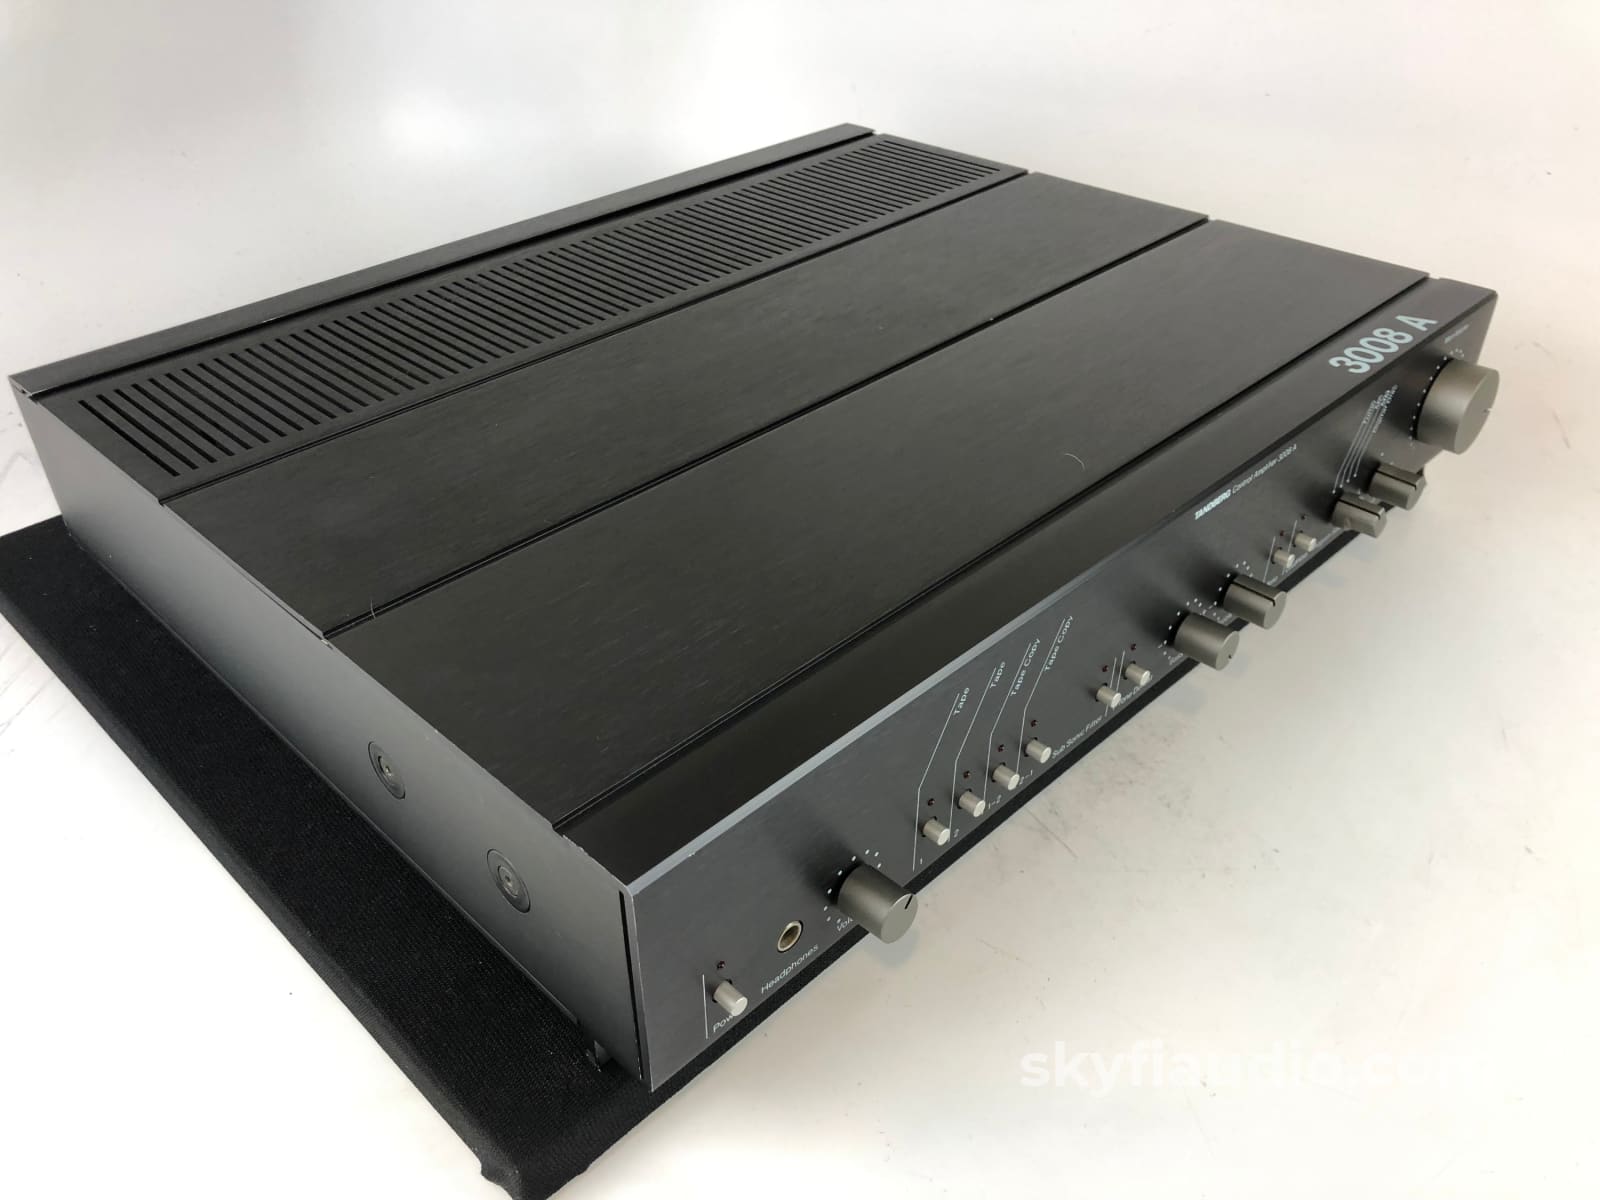 Tandberg Tca-3008A Solid State Preamplifier With Phono 120/220V Made In Norway